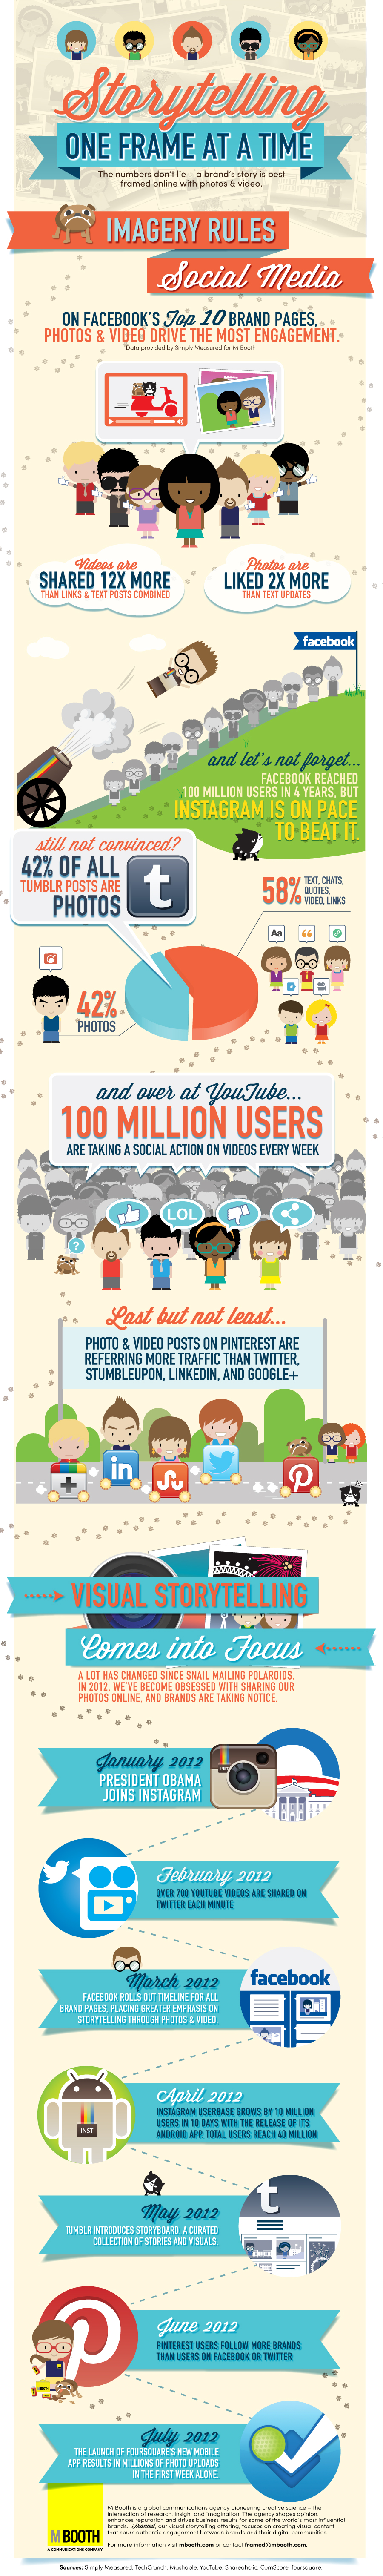 The Facts and Figures about the Power of Visual Content - Infographic